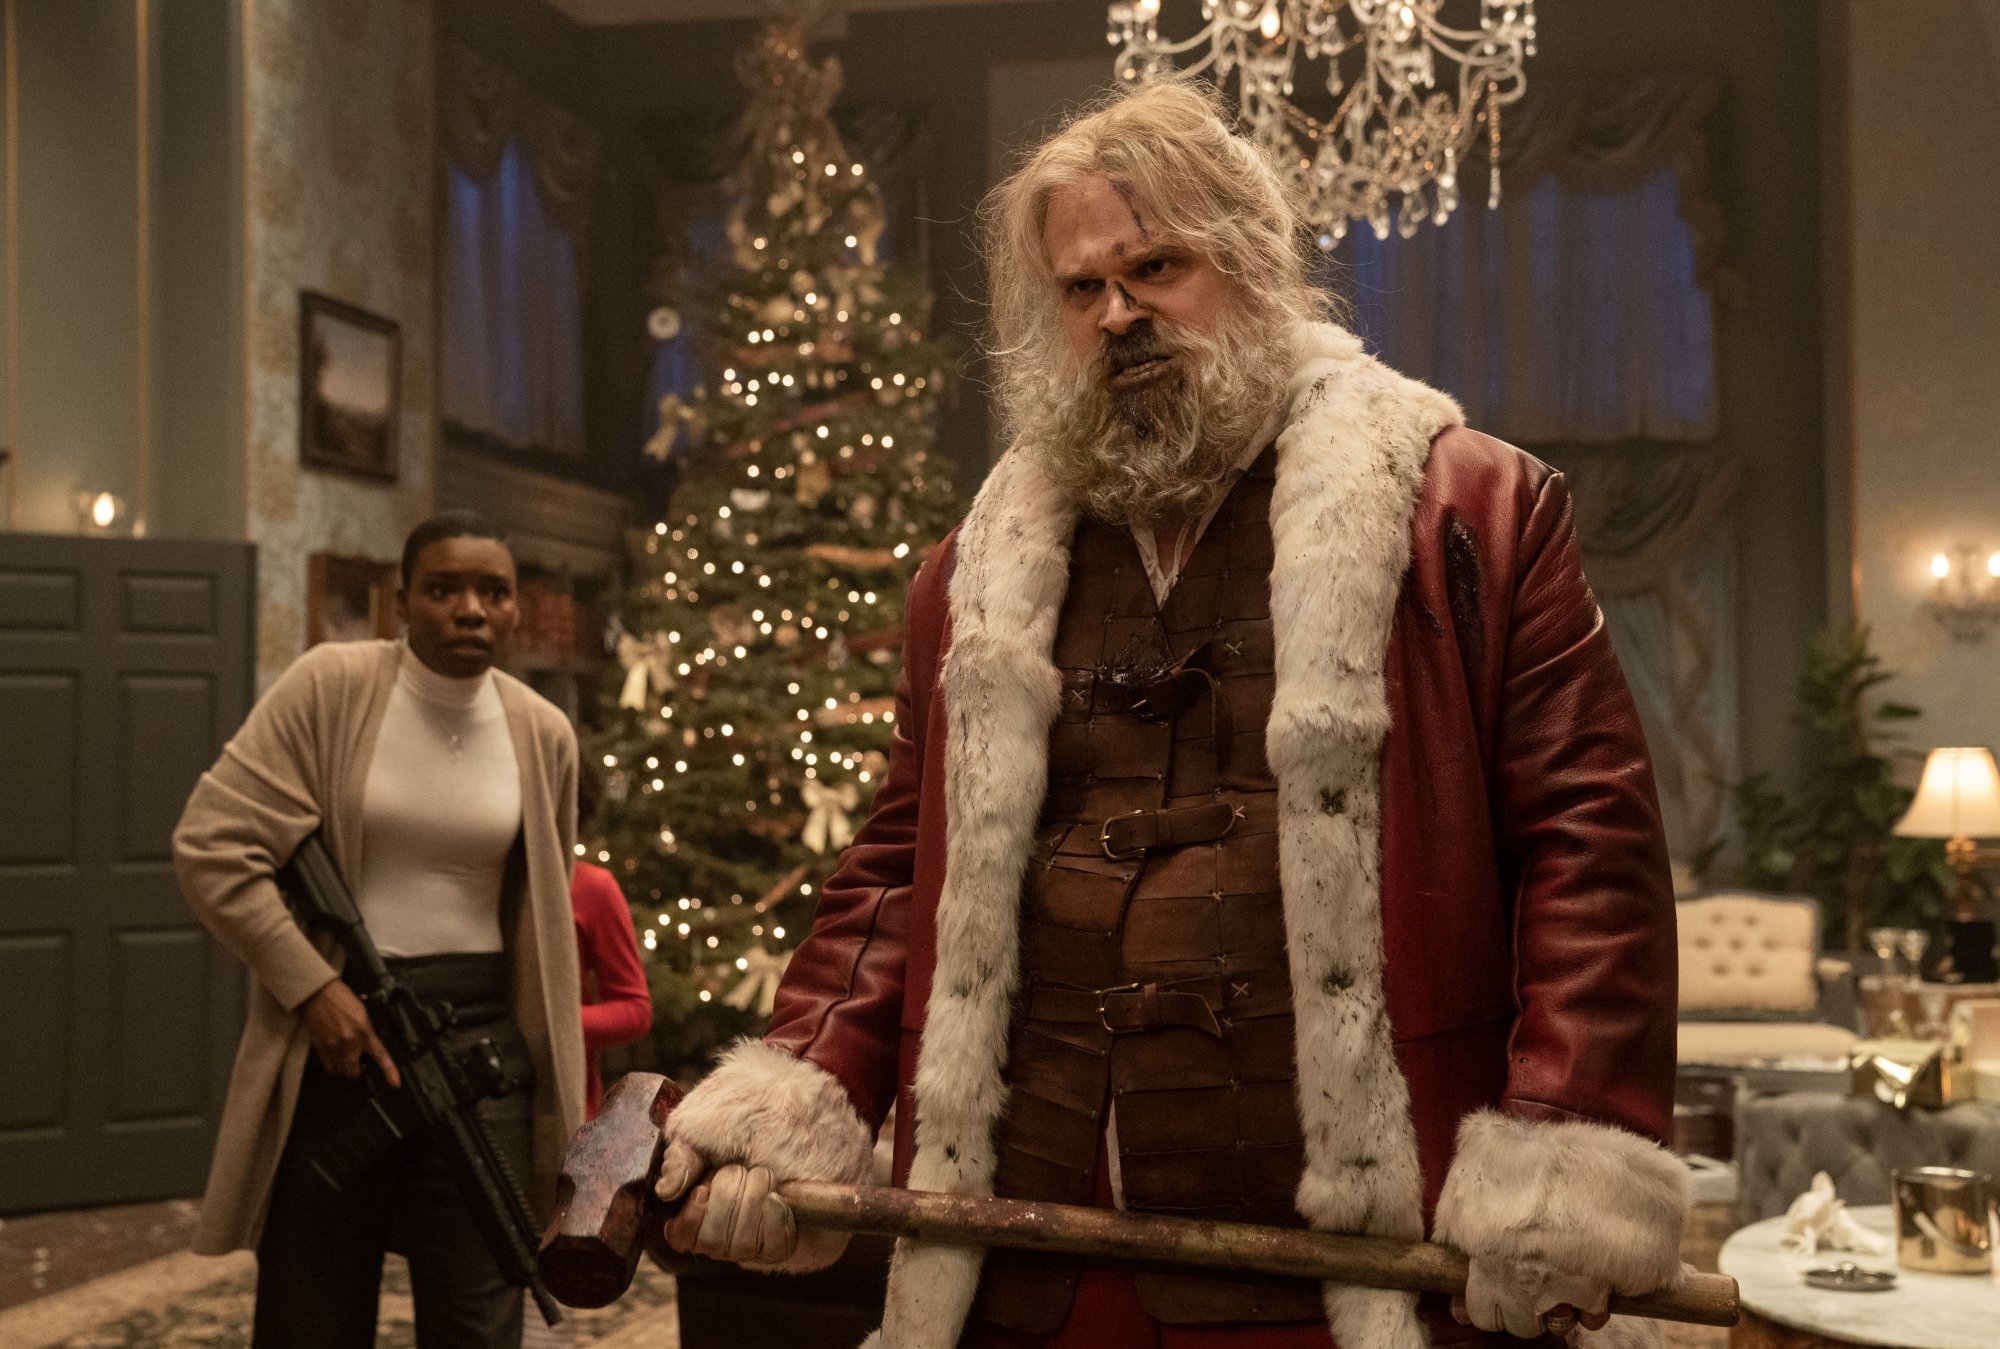 'Violent Night' Alexis Louder as Linda and David Harbour as Santa Claus. Linda is holding a gun and Santa is holding a sledgehammer. He's all beat up standing in front of a Christmas tree.